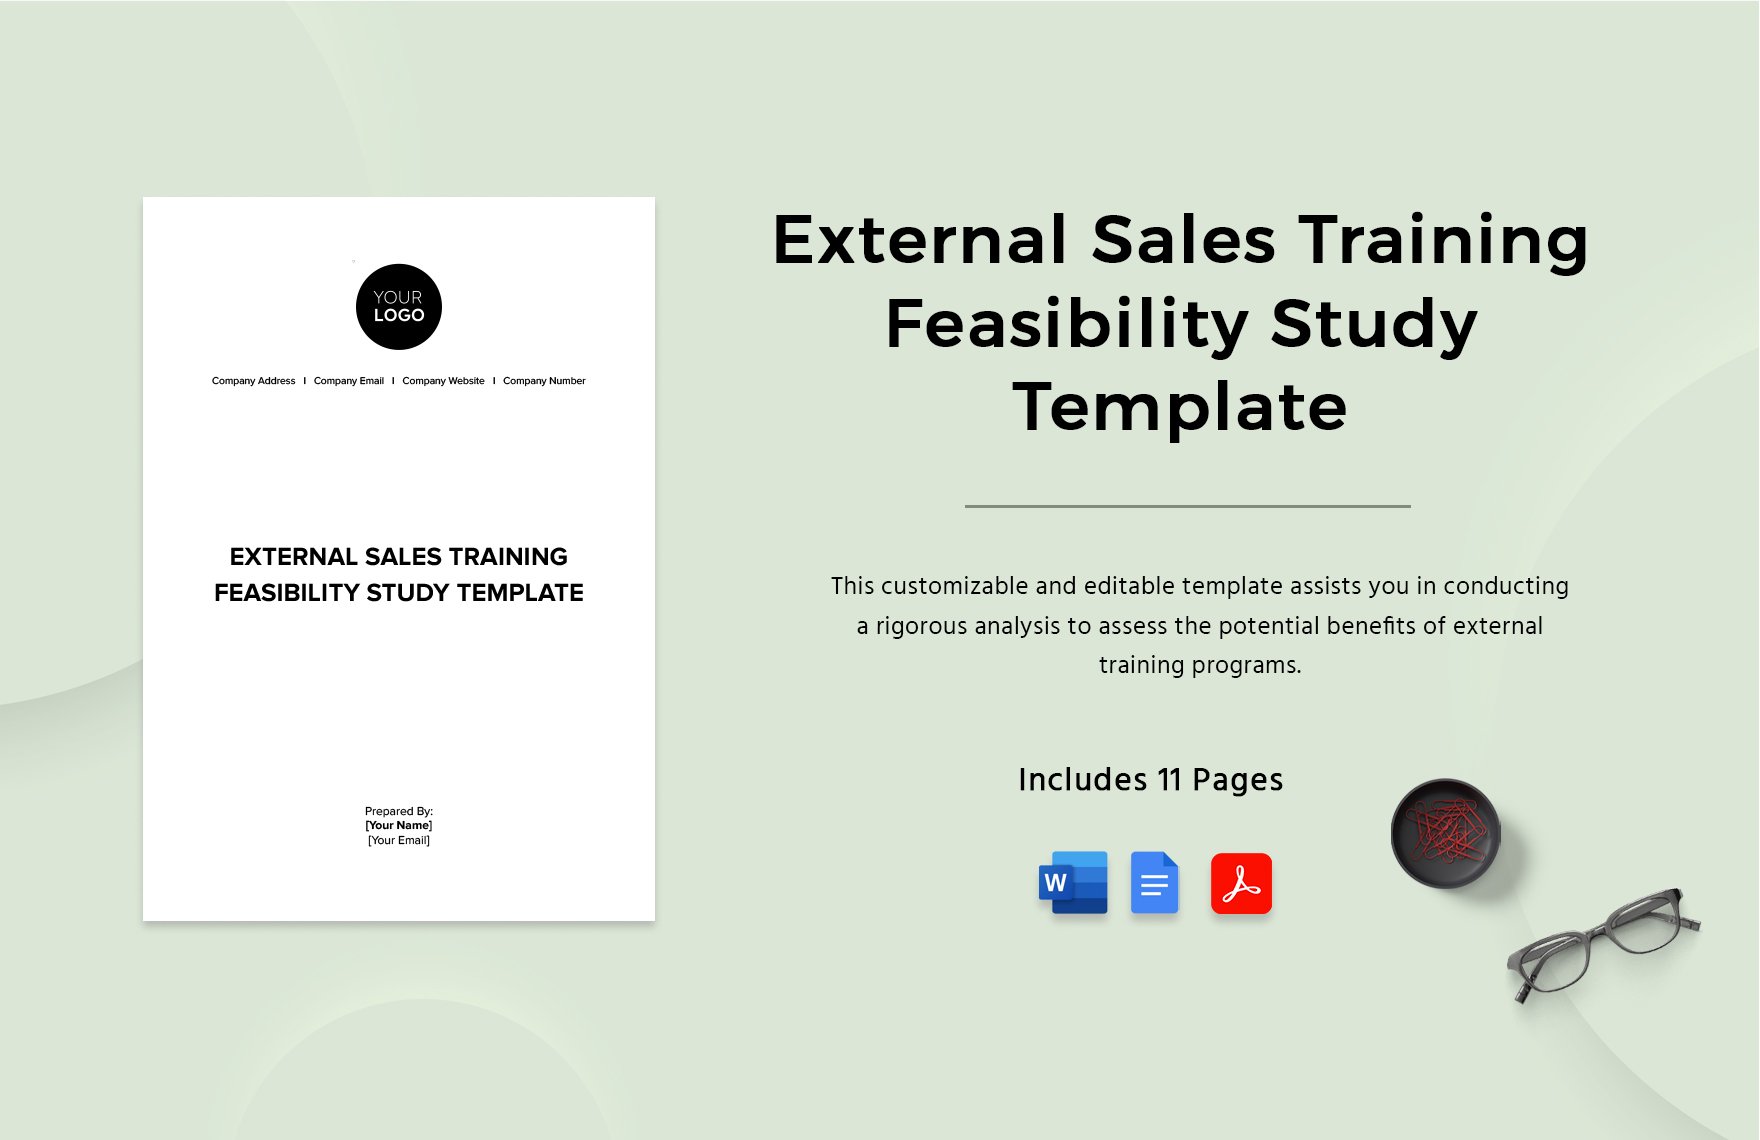 External Sales Training Feasibility Study Template in Word, Google Docs, PDF